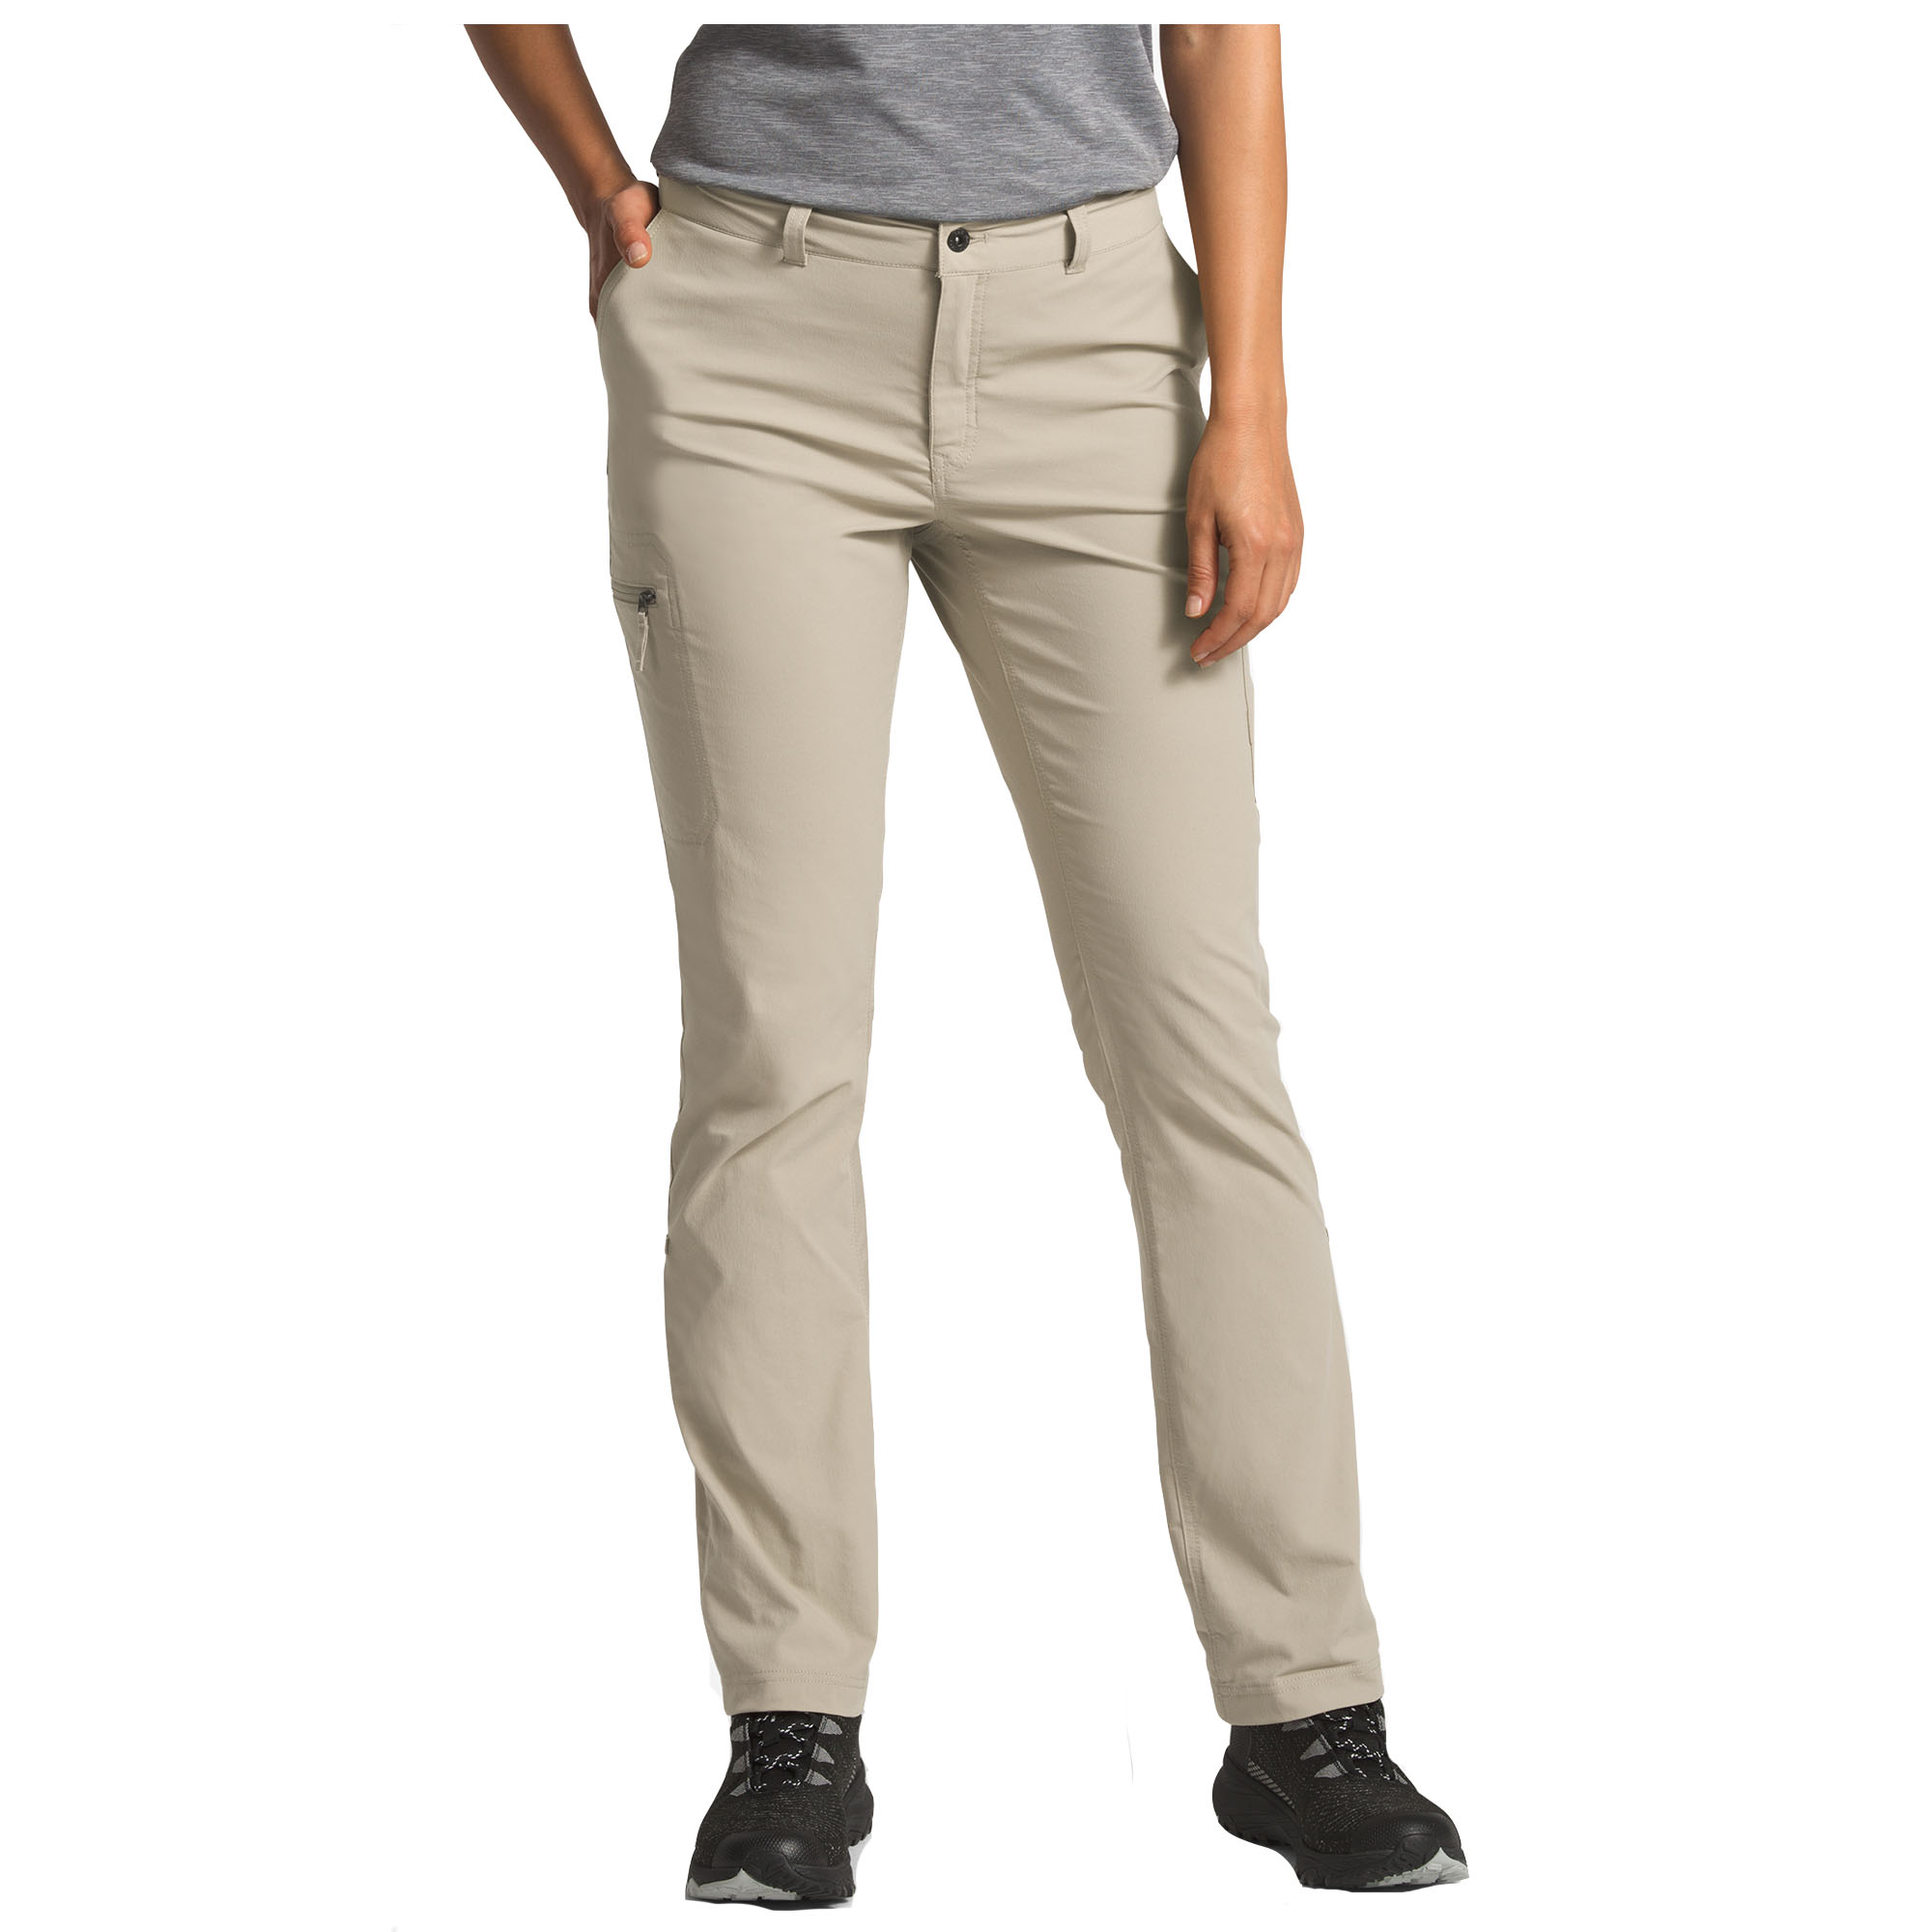 the north face women's hiking pants